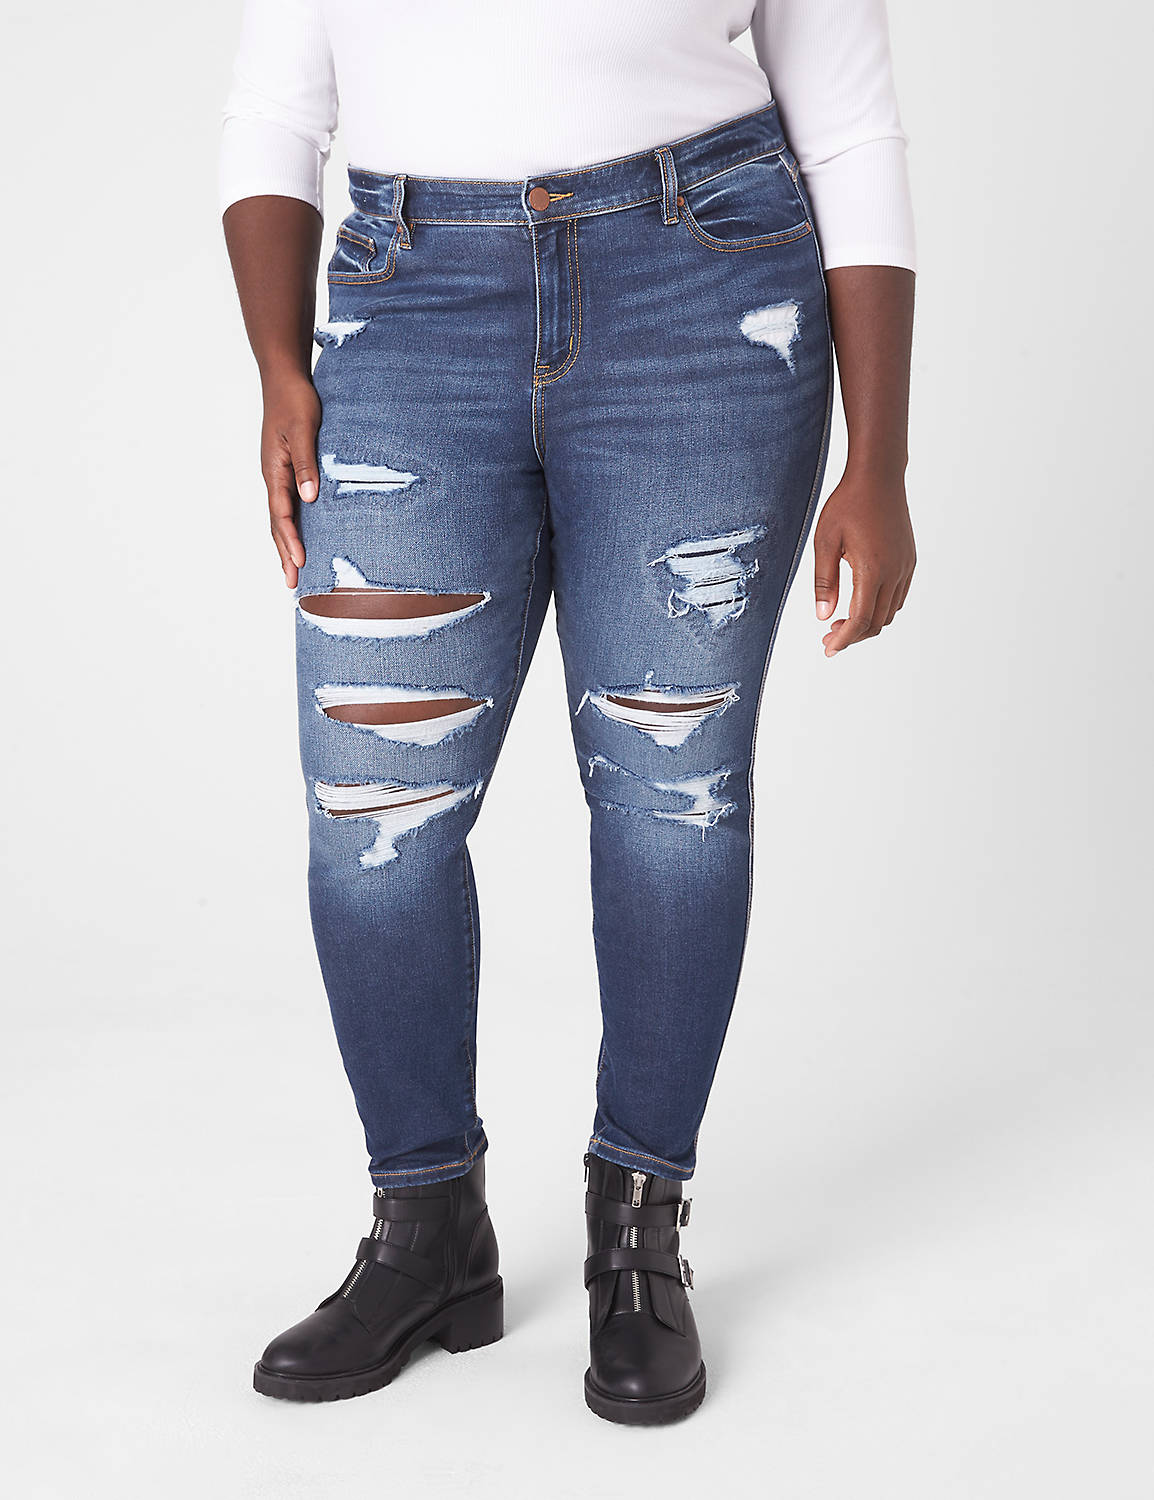 SIGNATURE FIT MID RISE SKINNY - BOD Product Image 3